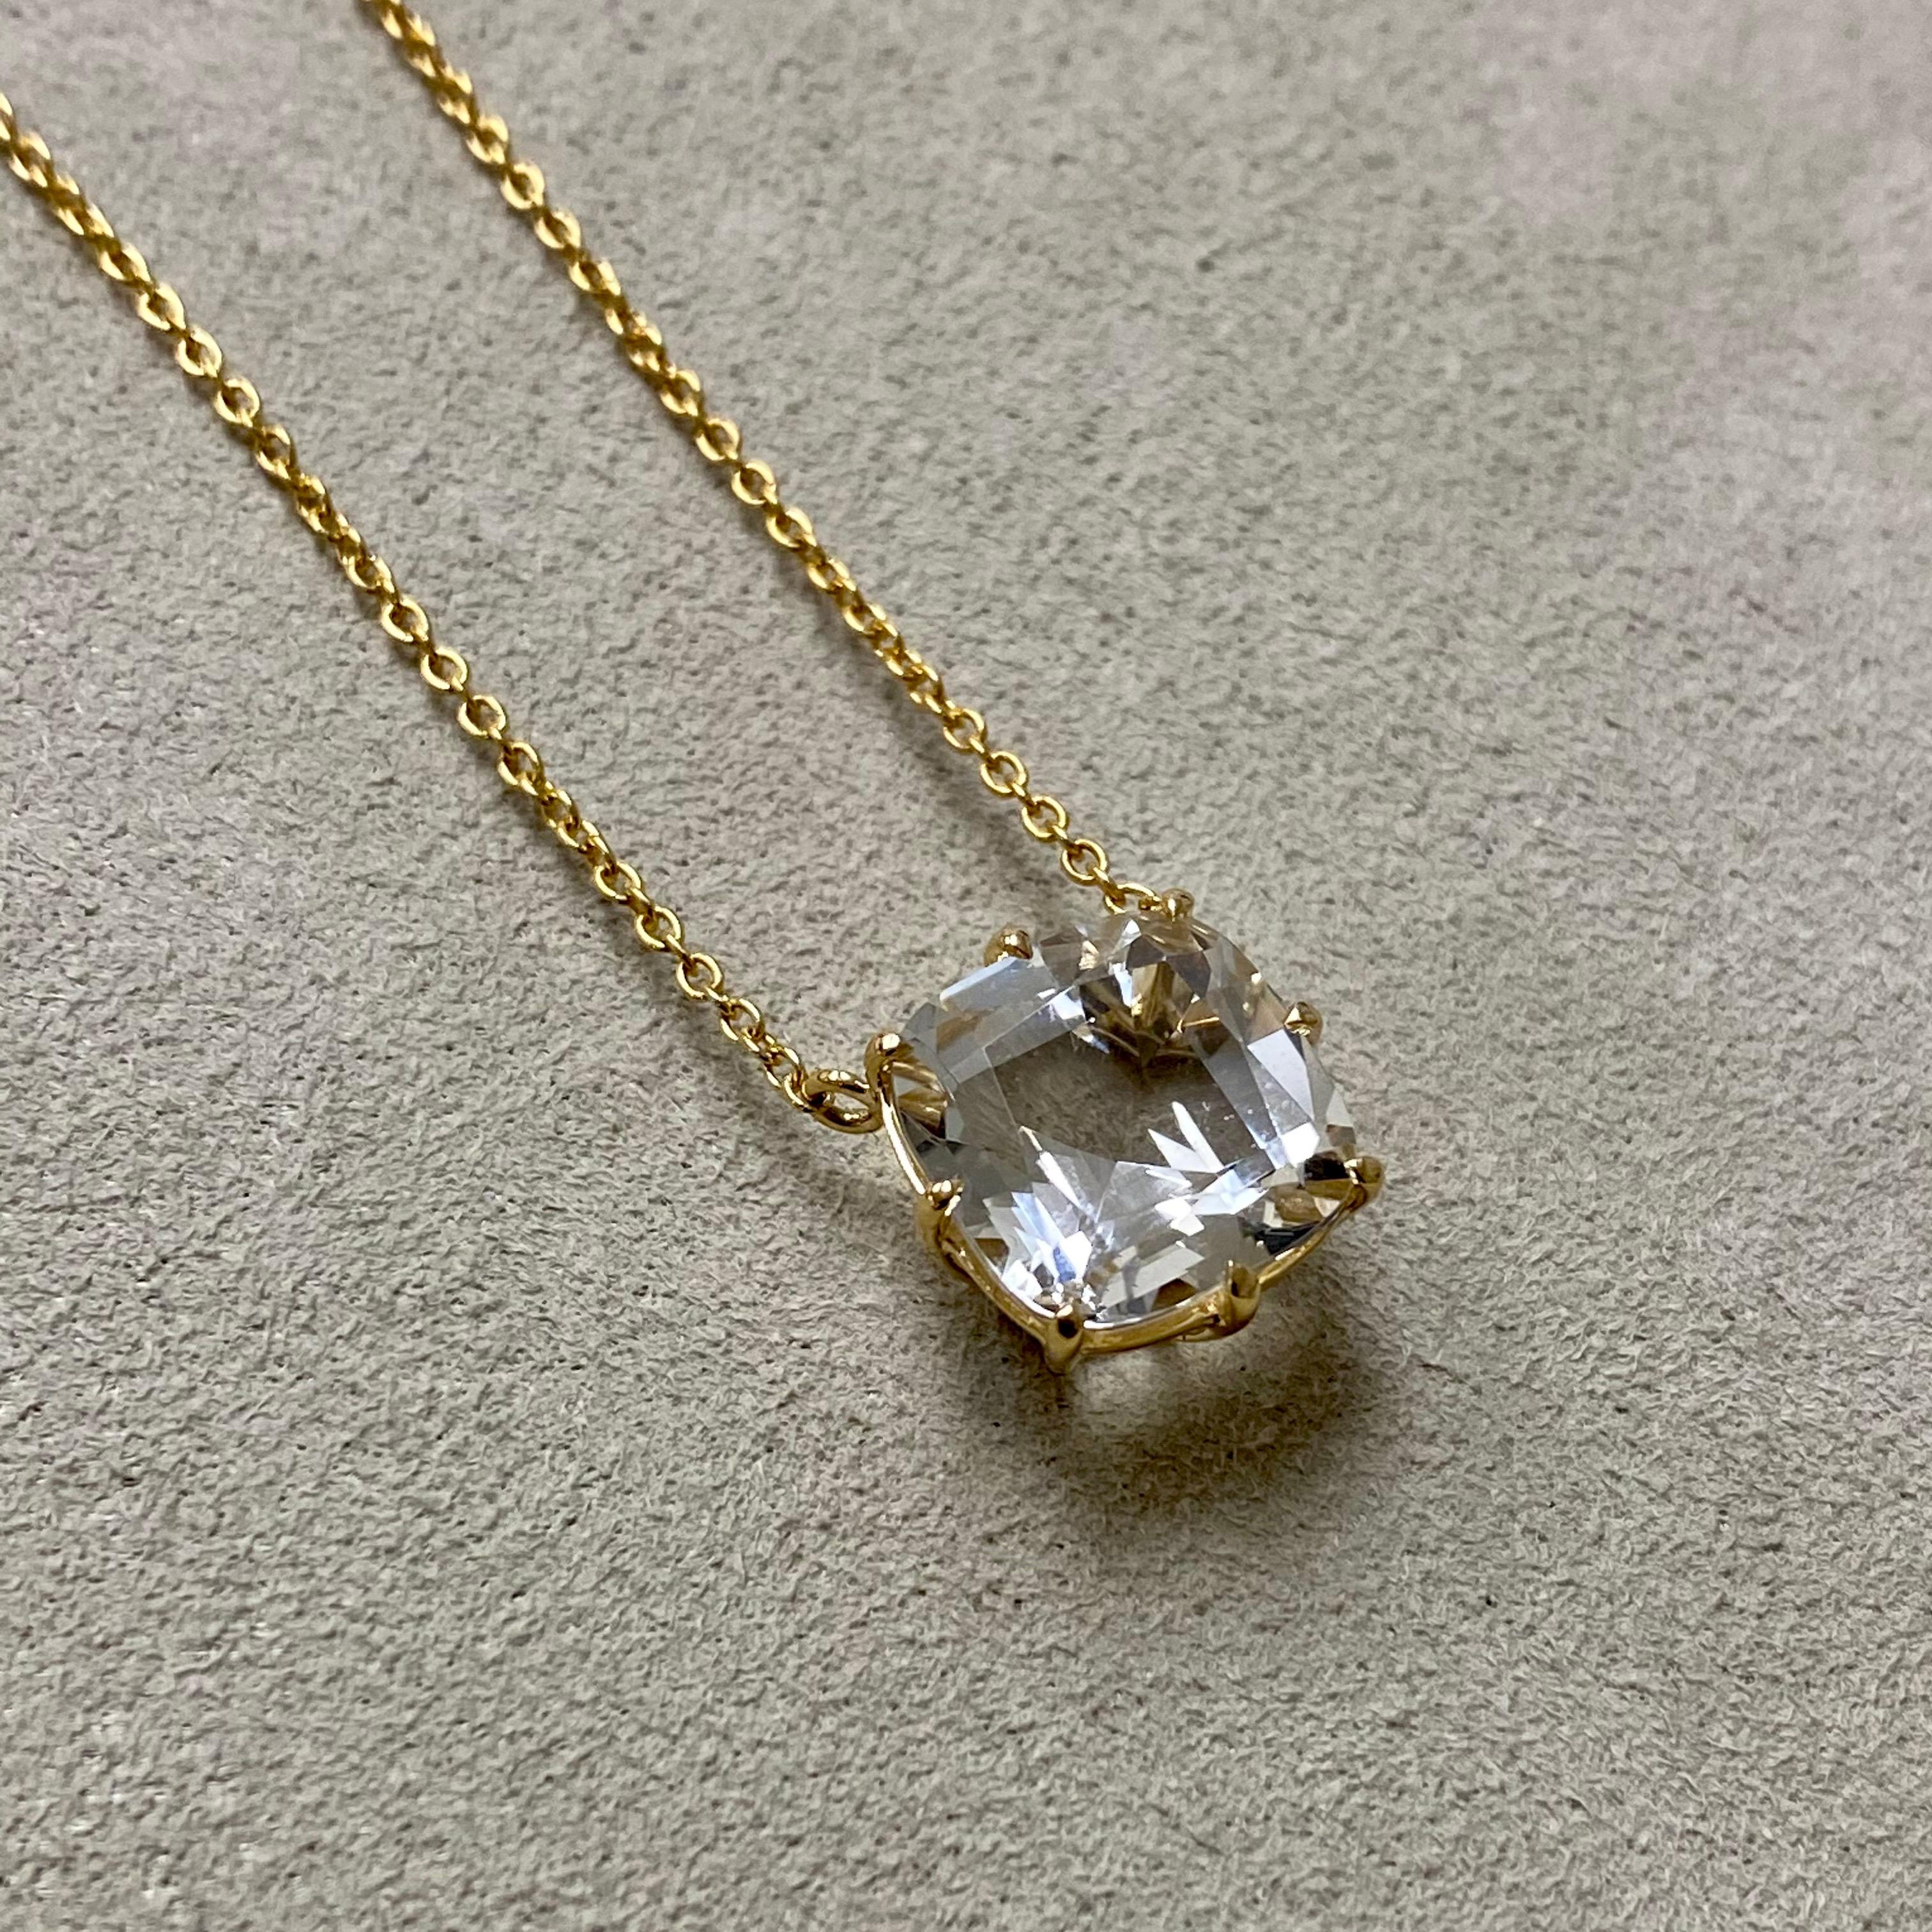 Created in 18 karat yellow gold
Rock Crystal 4 carats
18 inch chain with loops at 16th and 17th inch

Crafted from 18 karat yellow gold, this stunning necklace showcases a rock crystal of 4 carats, suspended from an 18 inch chain featuring loops at